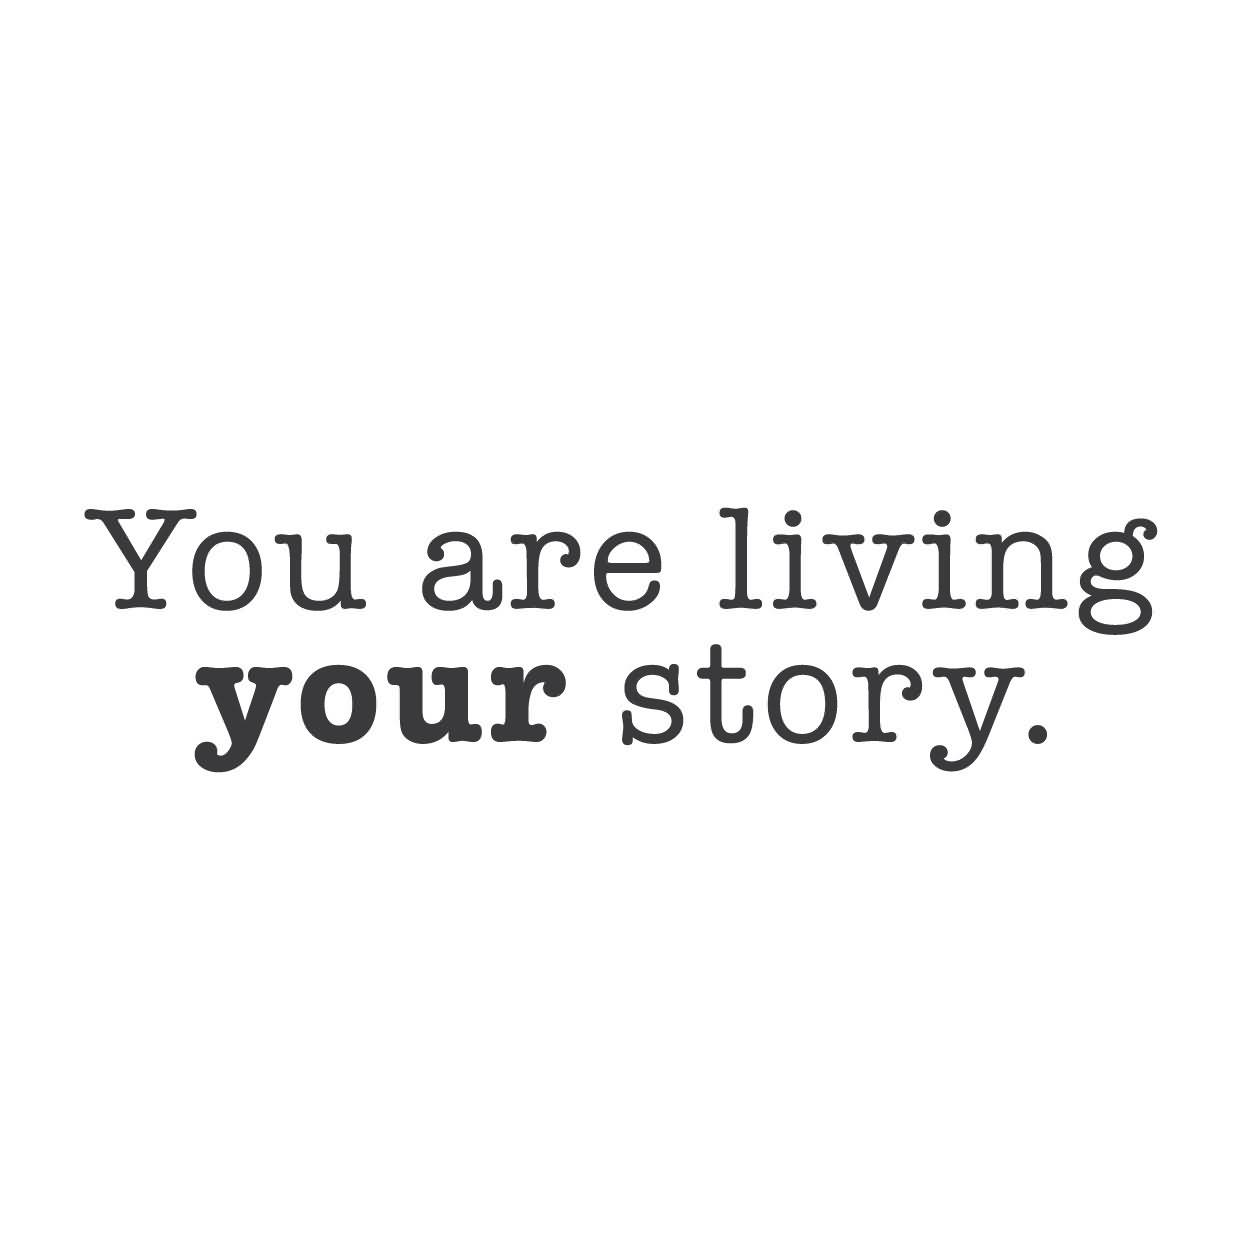 You are living your story